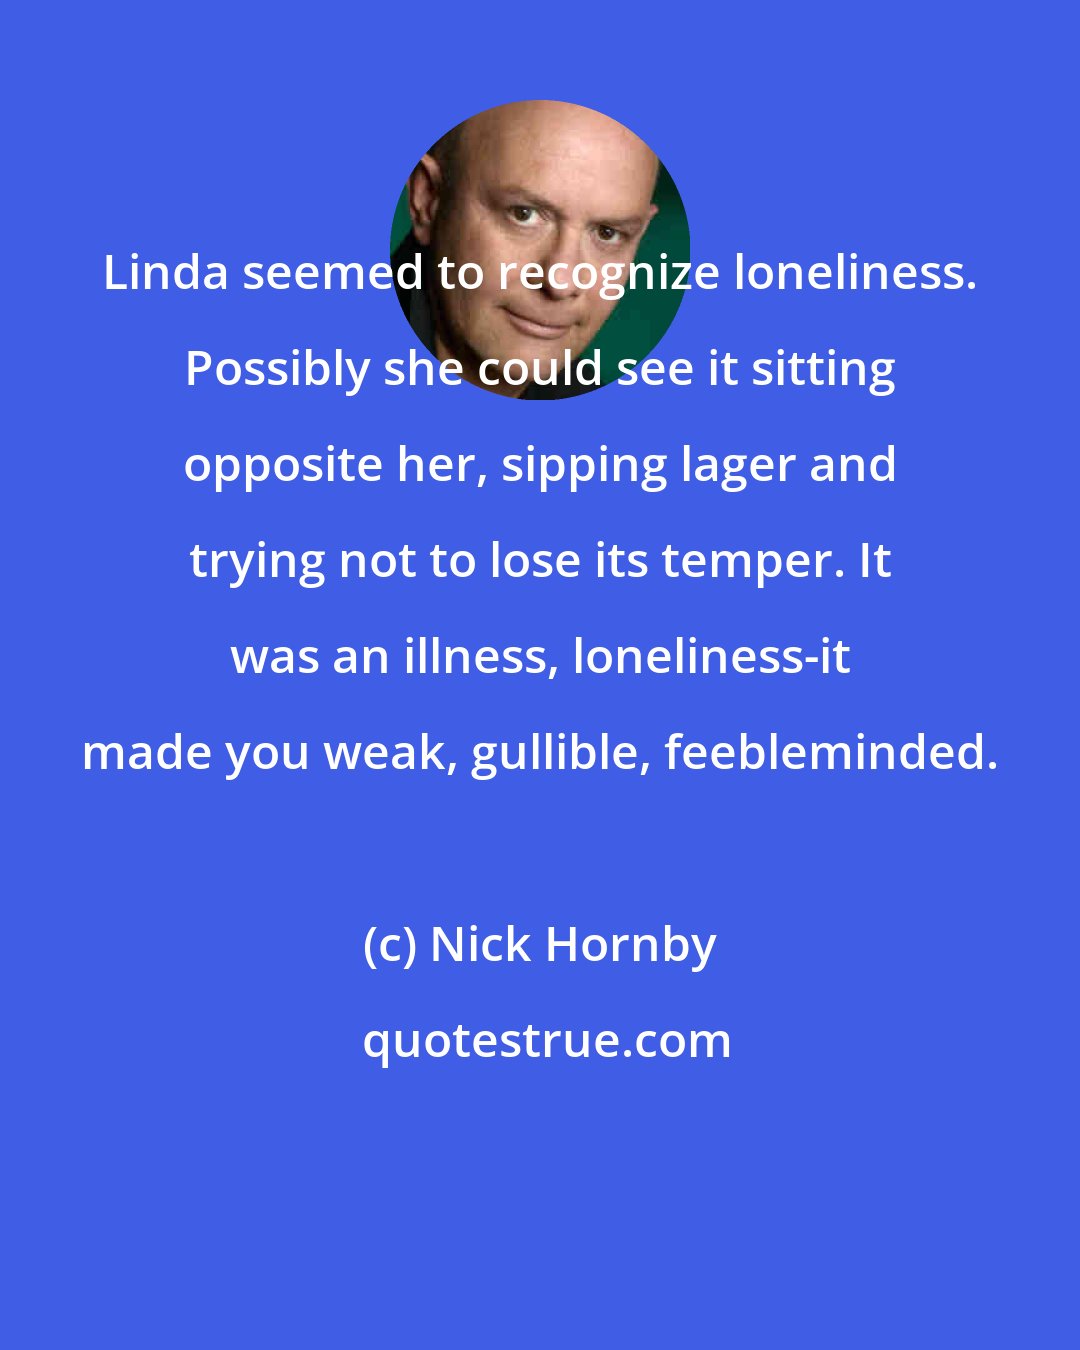 Nick Hornby: Linda seemed to recognize loneliness. Possibly she could see it sitting opposite her, sipping lager and trying not to lose its temper. It was an illness, loneliness-it made you weak, gullible, feebleminded.